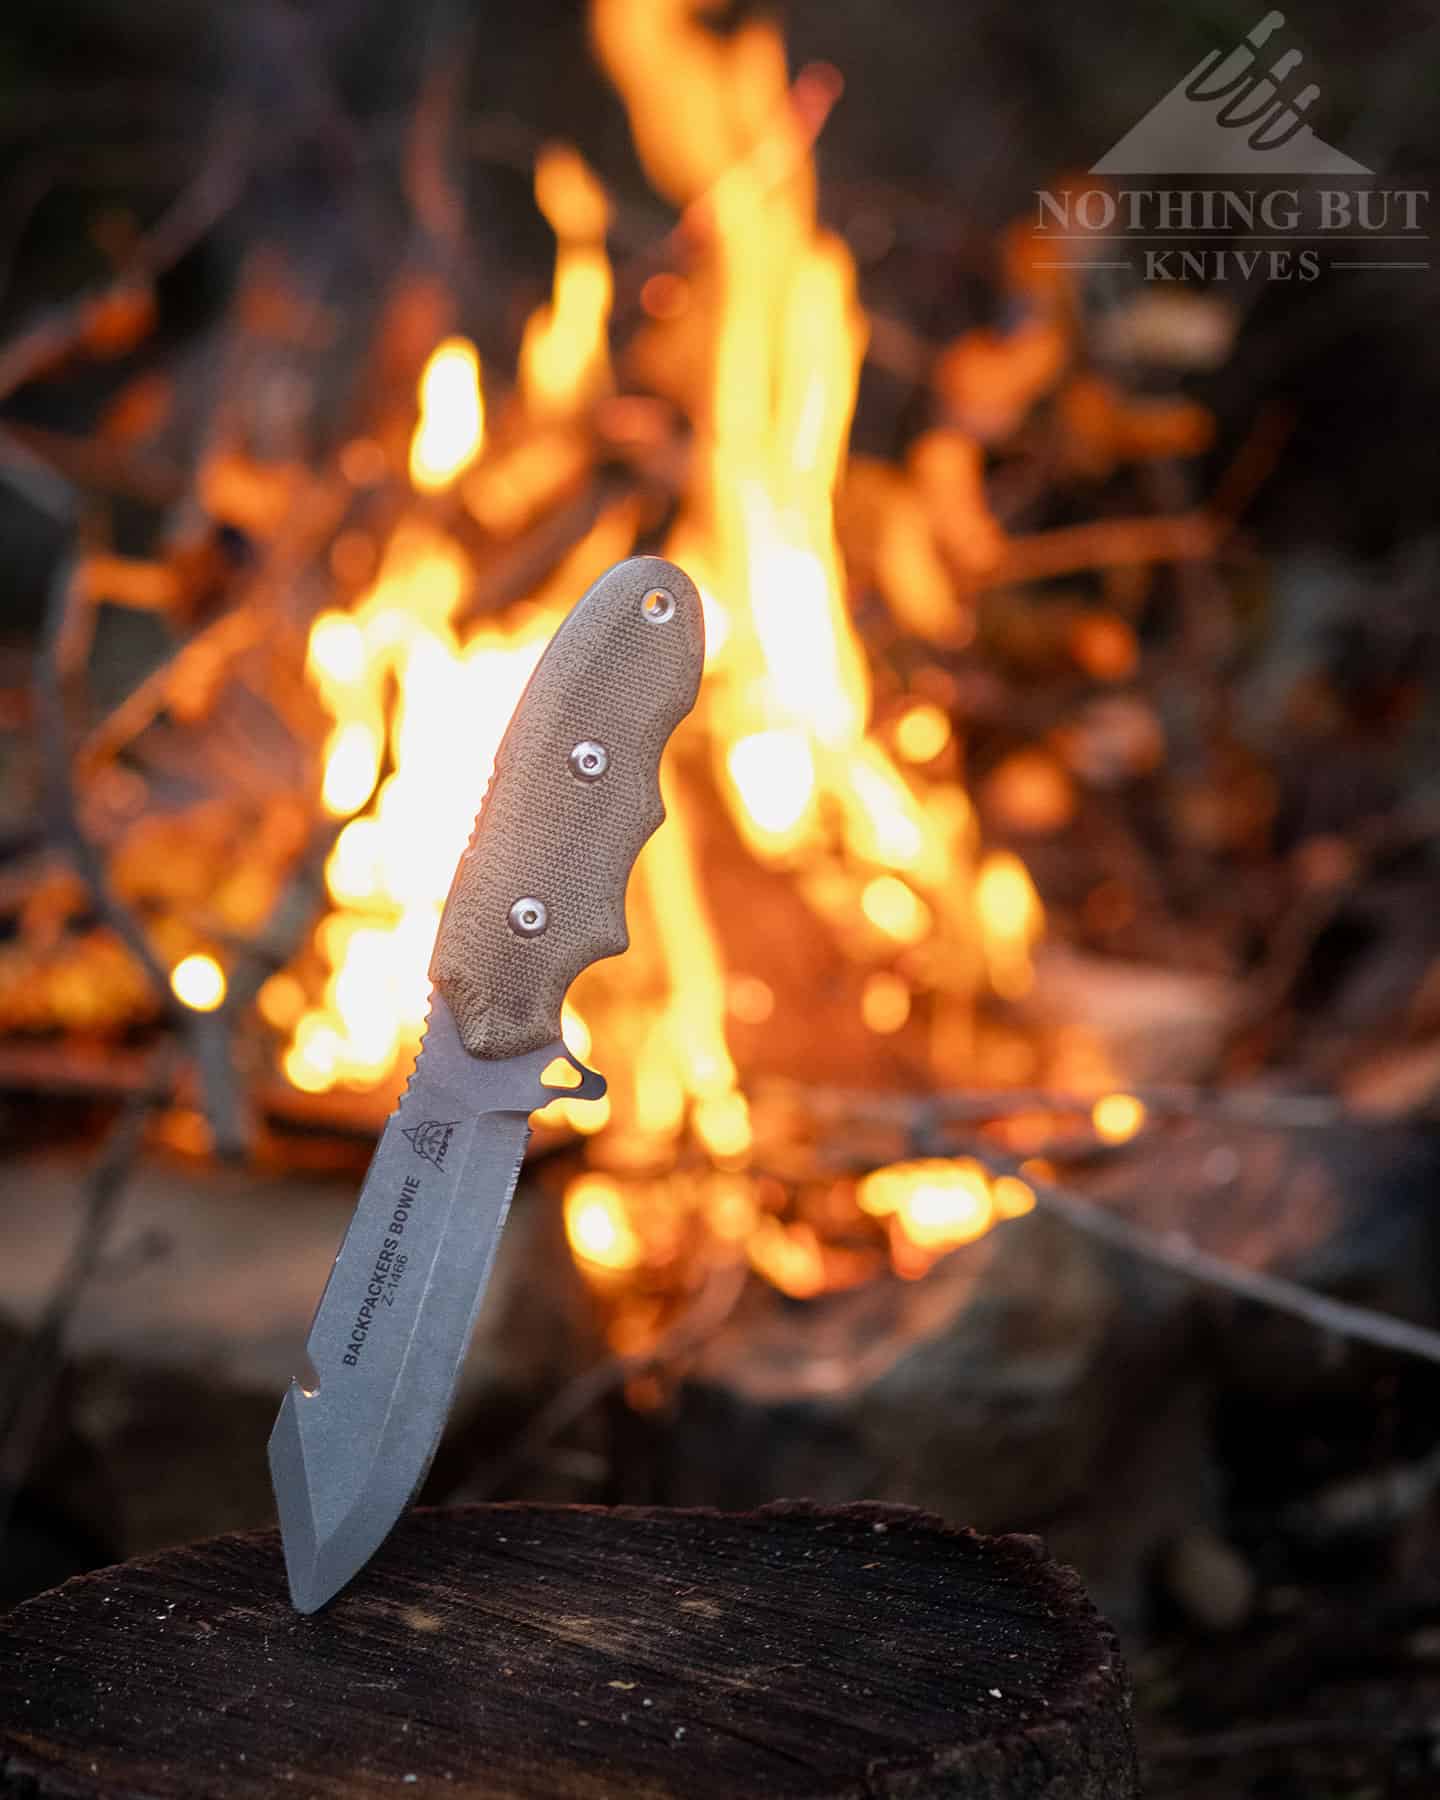 The TOPS Backpacker's Bowie knife is so popular that it is often hard to find, but it is worth the effort if you are in the market for a small, practical Bowie knife.